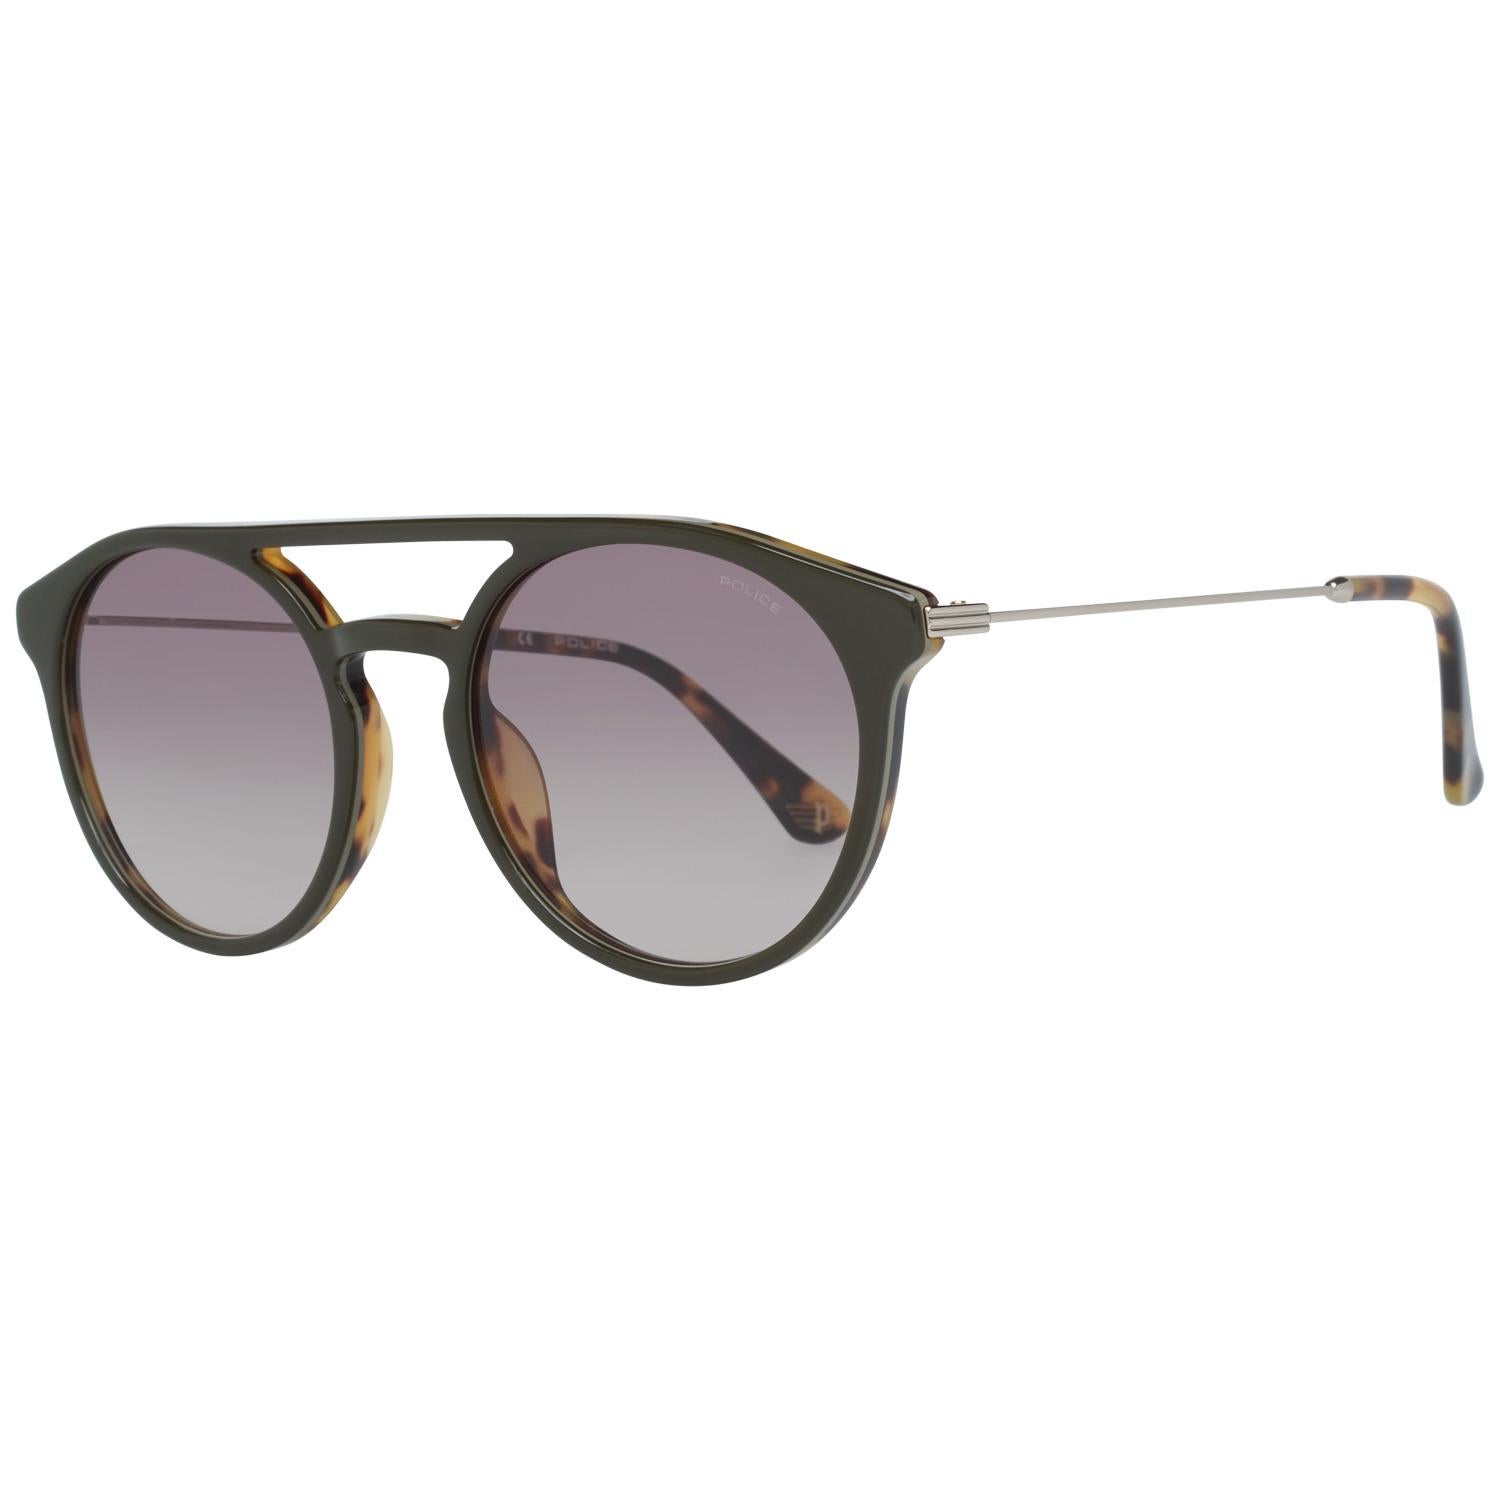 Details
MATERIAL: Metal
COLOR: Brown
MODEL: SPL722 5306E3
GENDER: Adult Unisex
COUNTRY OF MANUFACTURE: China
TYPE: Sunglasses
ORIGINAL CASE?: Yes
STYLE: Round
OCCASION: Casual
FEATURES: Lightweight
LENS COLOR: Grey
LENS TECHNOLOGY: Gradient
YEAR